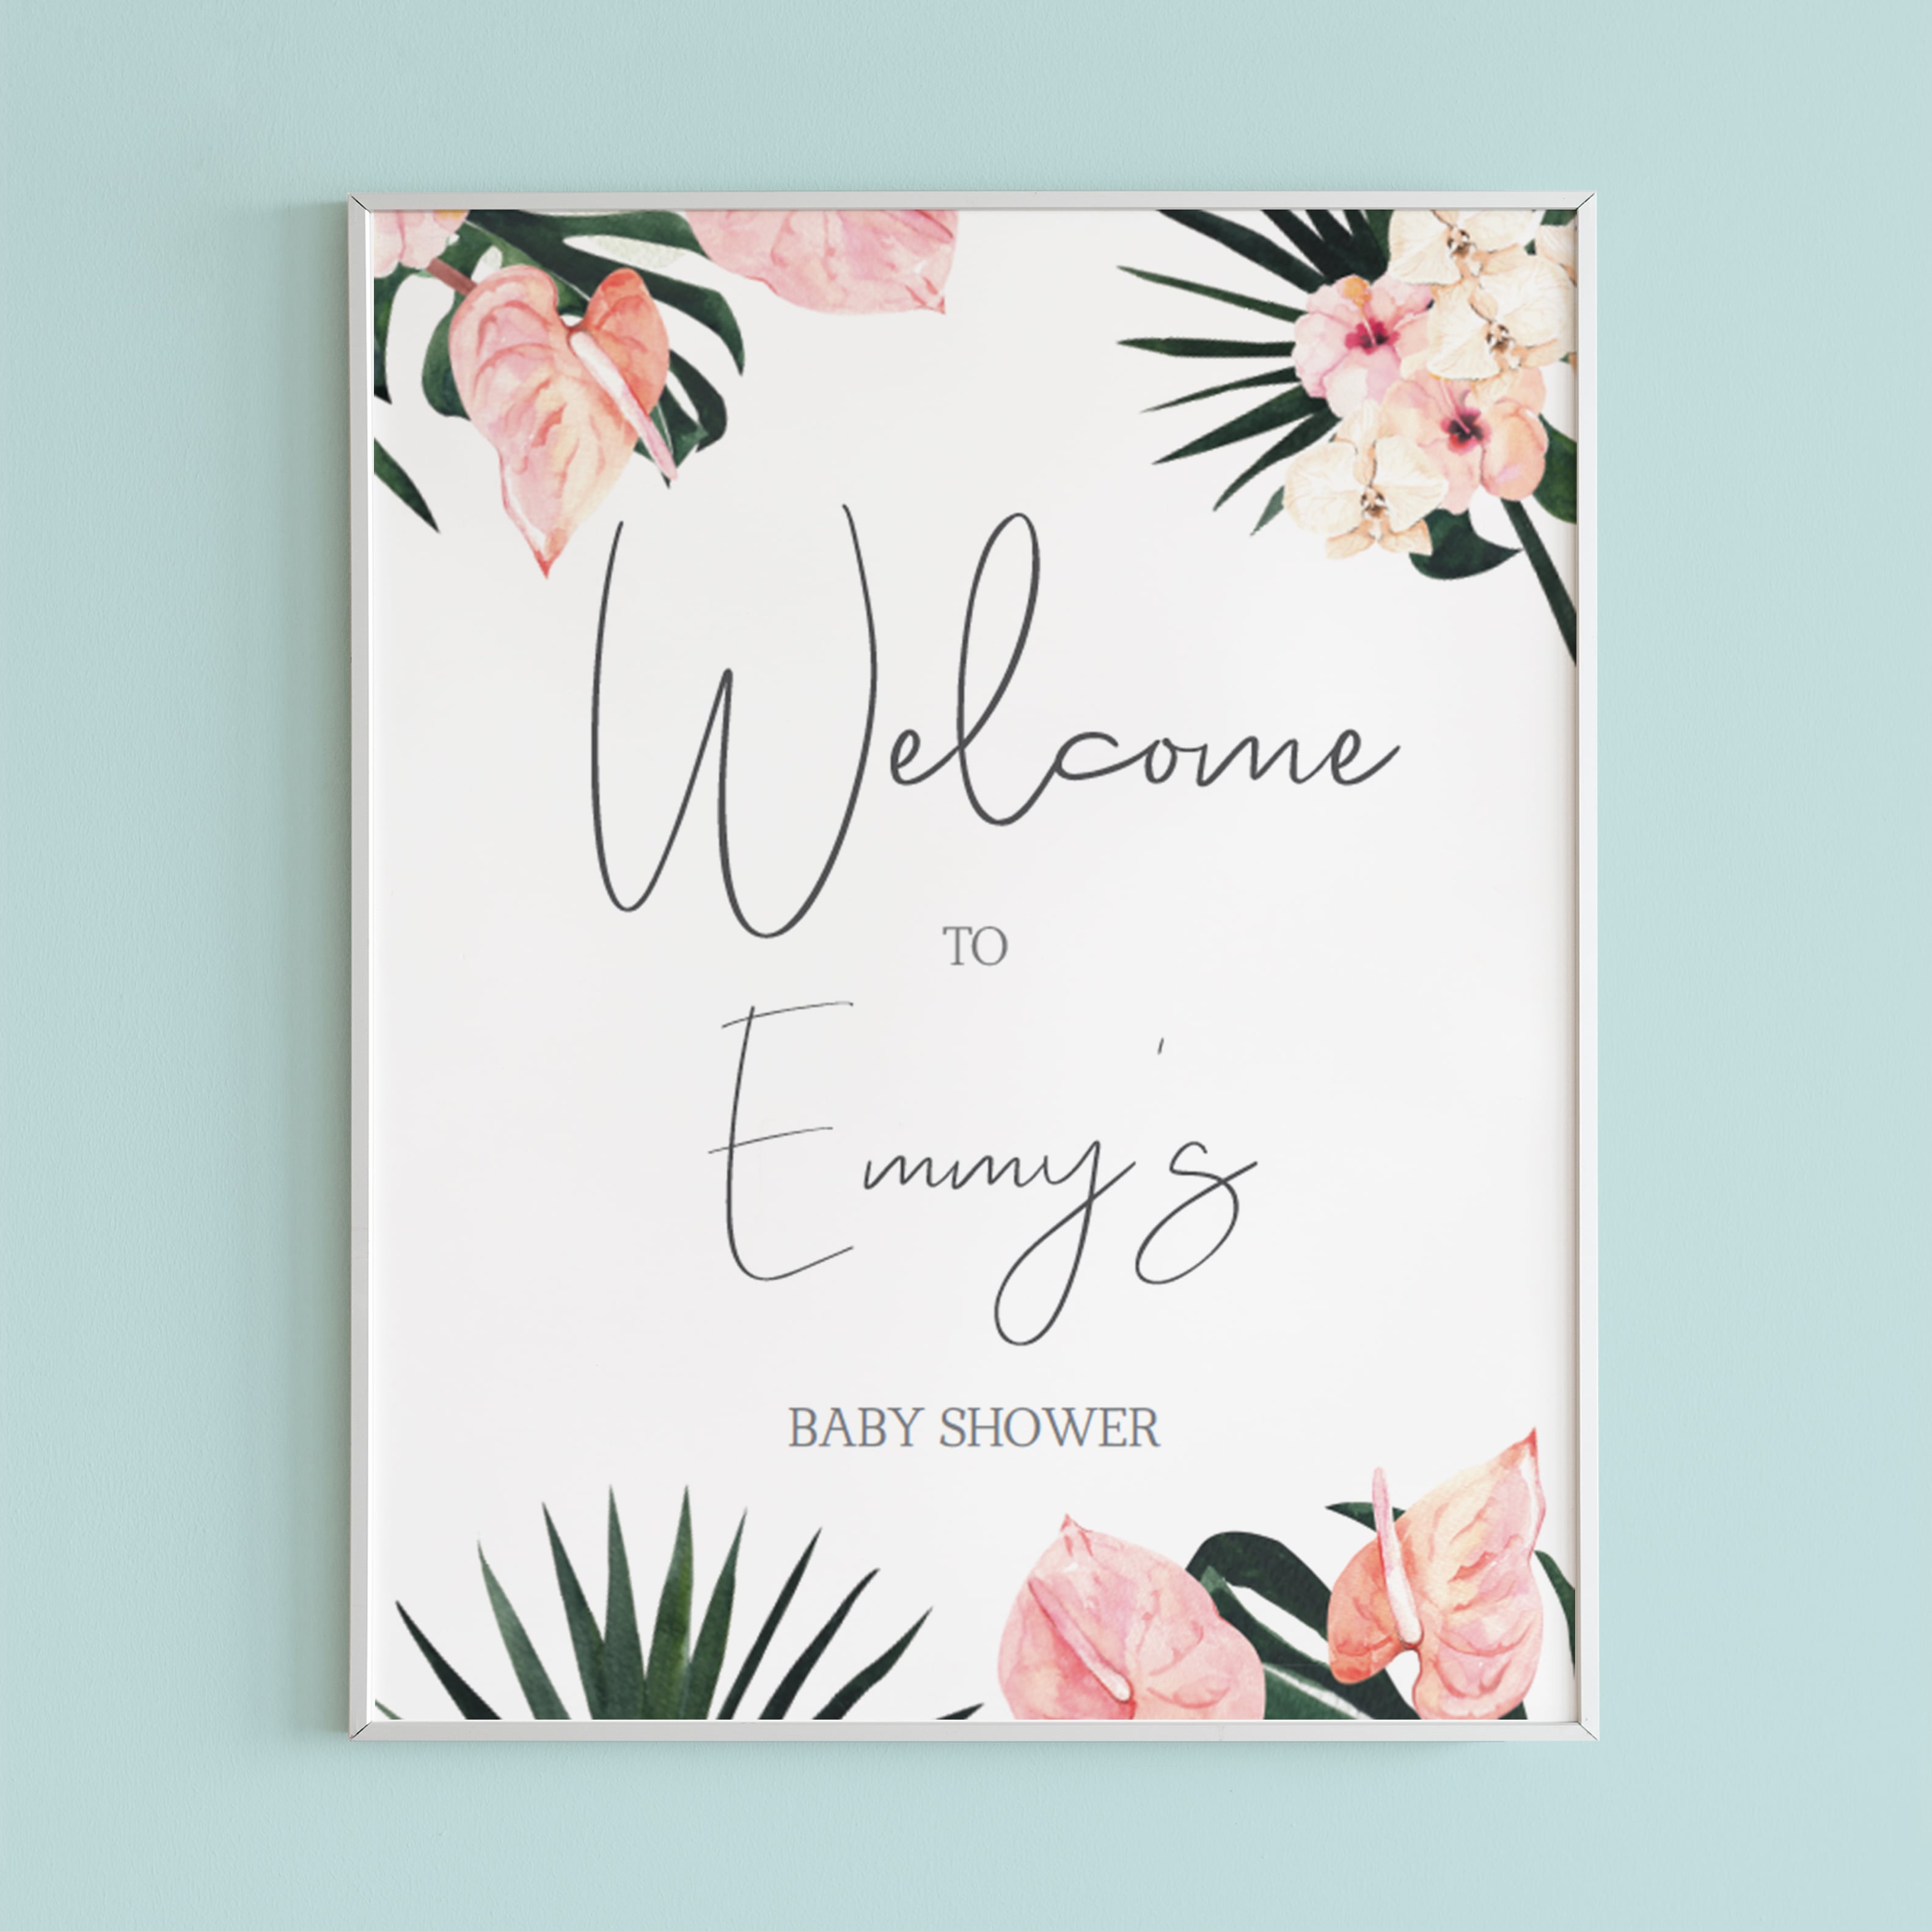 Blush greenery baby shower welcome sign by LittleSizzle